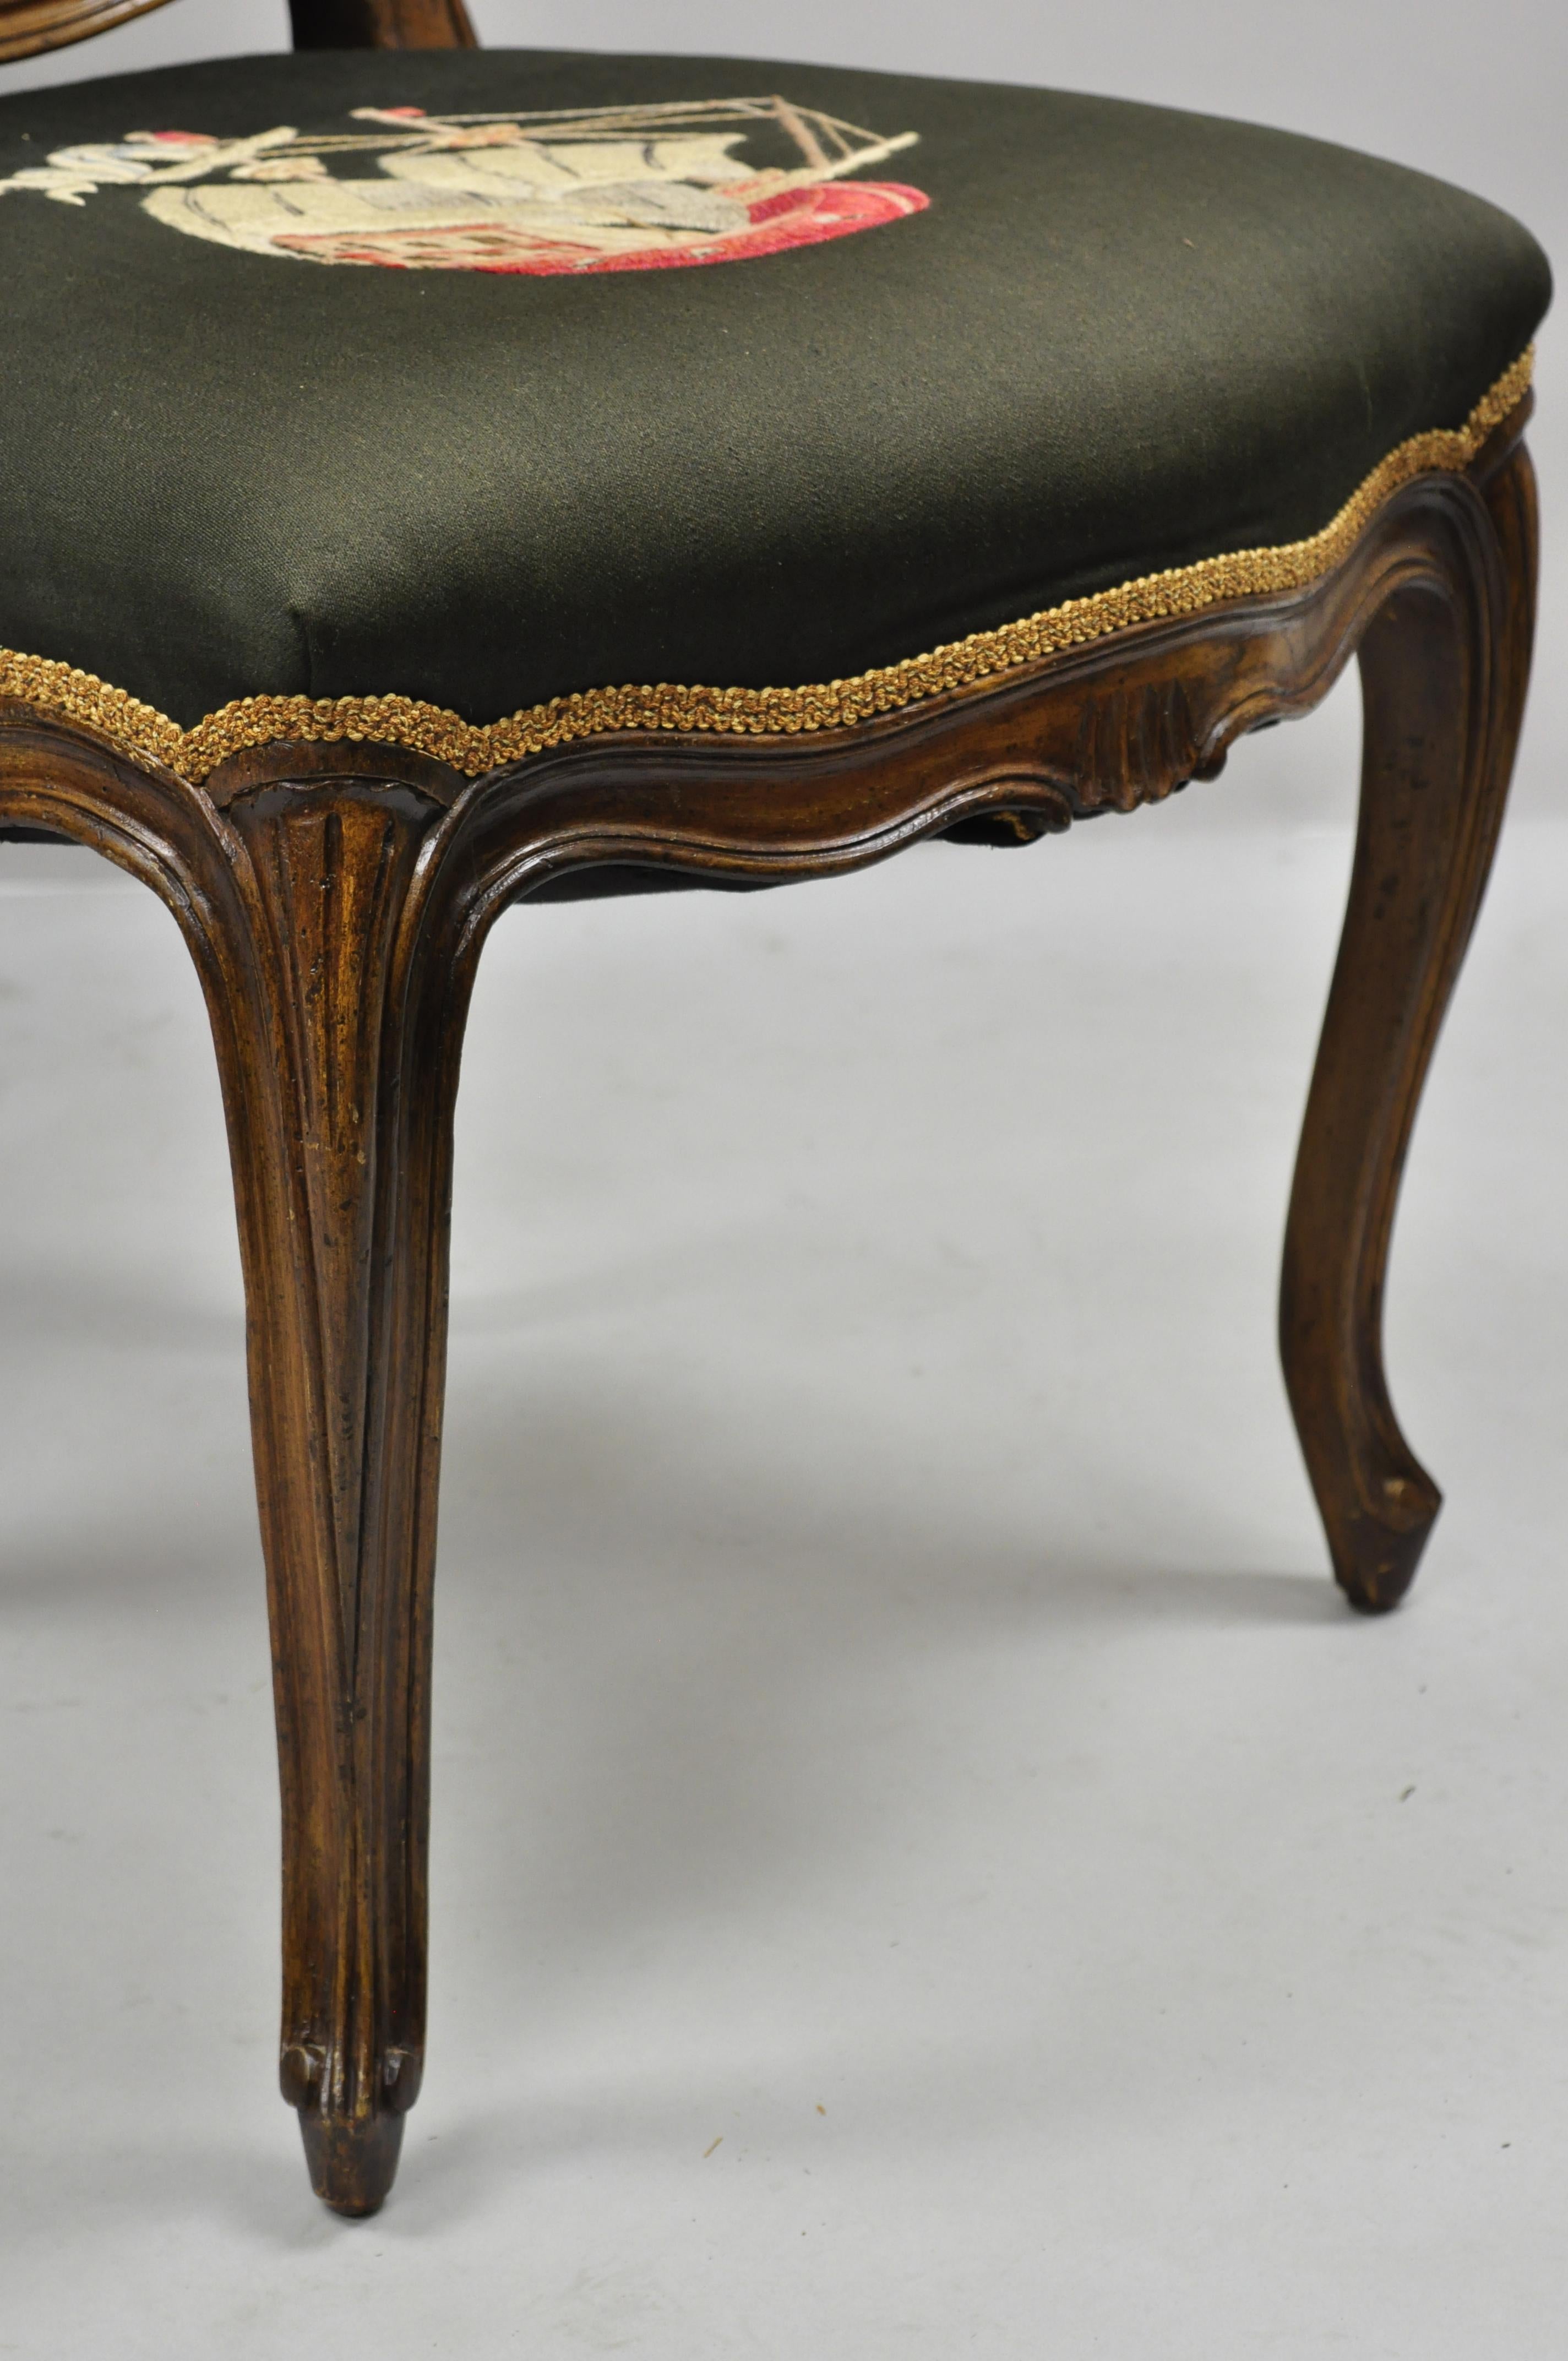 French Provincial Louis XV Walnut Side Chairs w/ Ship Boat Crewel Work, a Pair For Sale 4